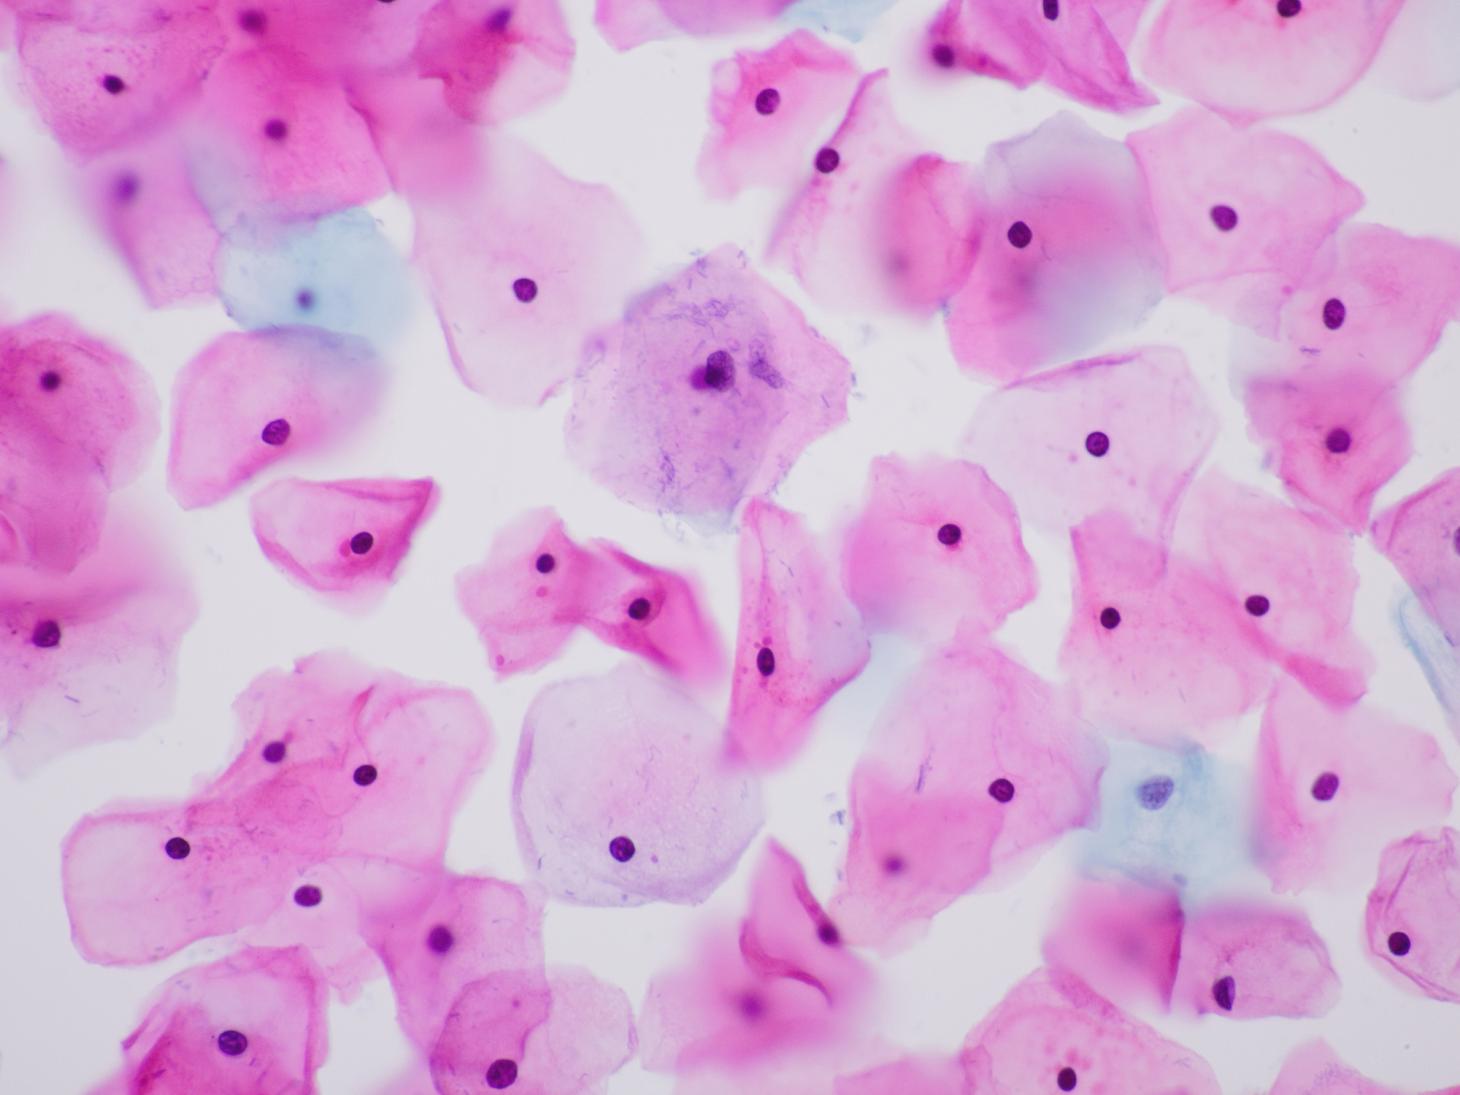 Microscopic view of pink cervix cells as studied by biology majors